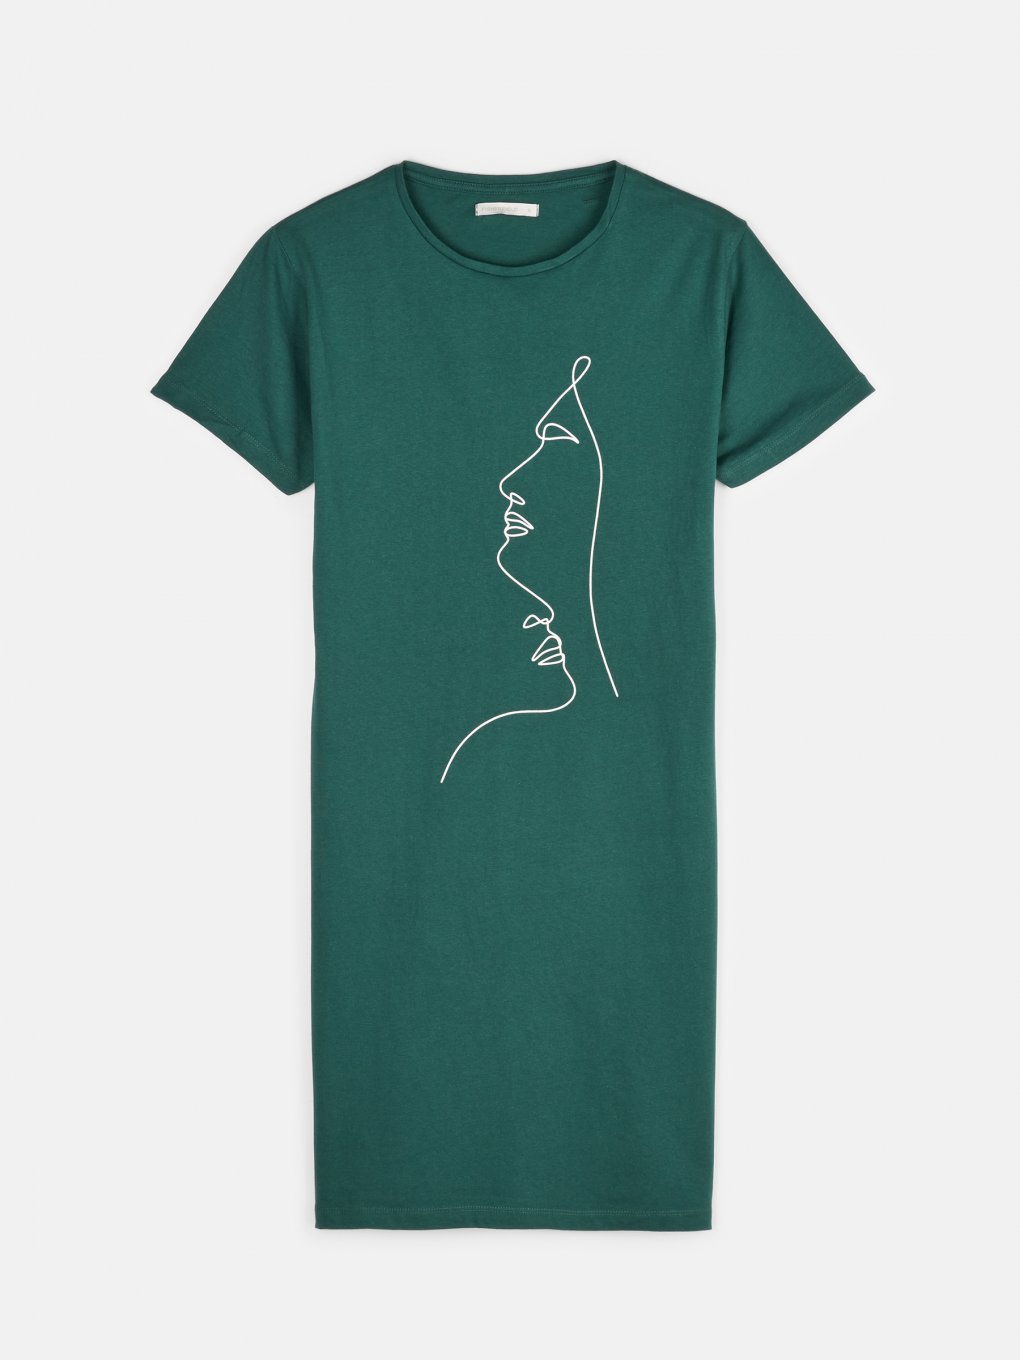 T-shirt dress with graphic print